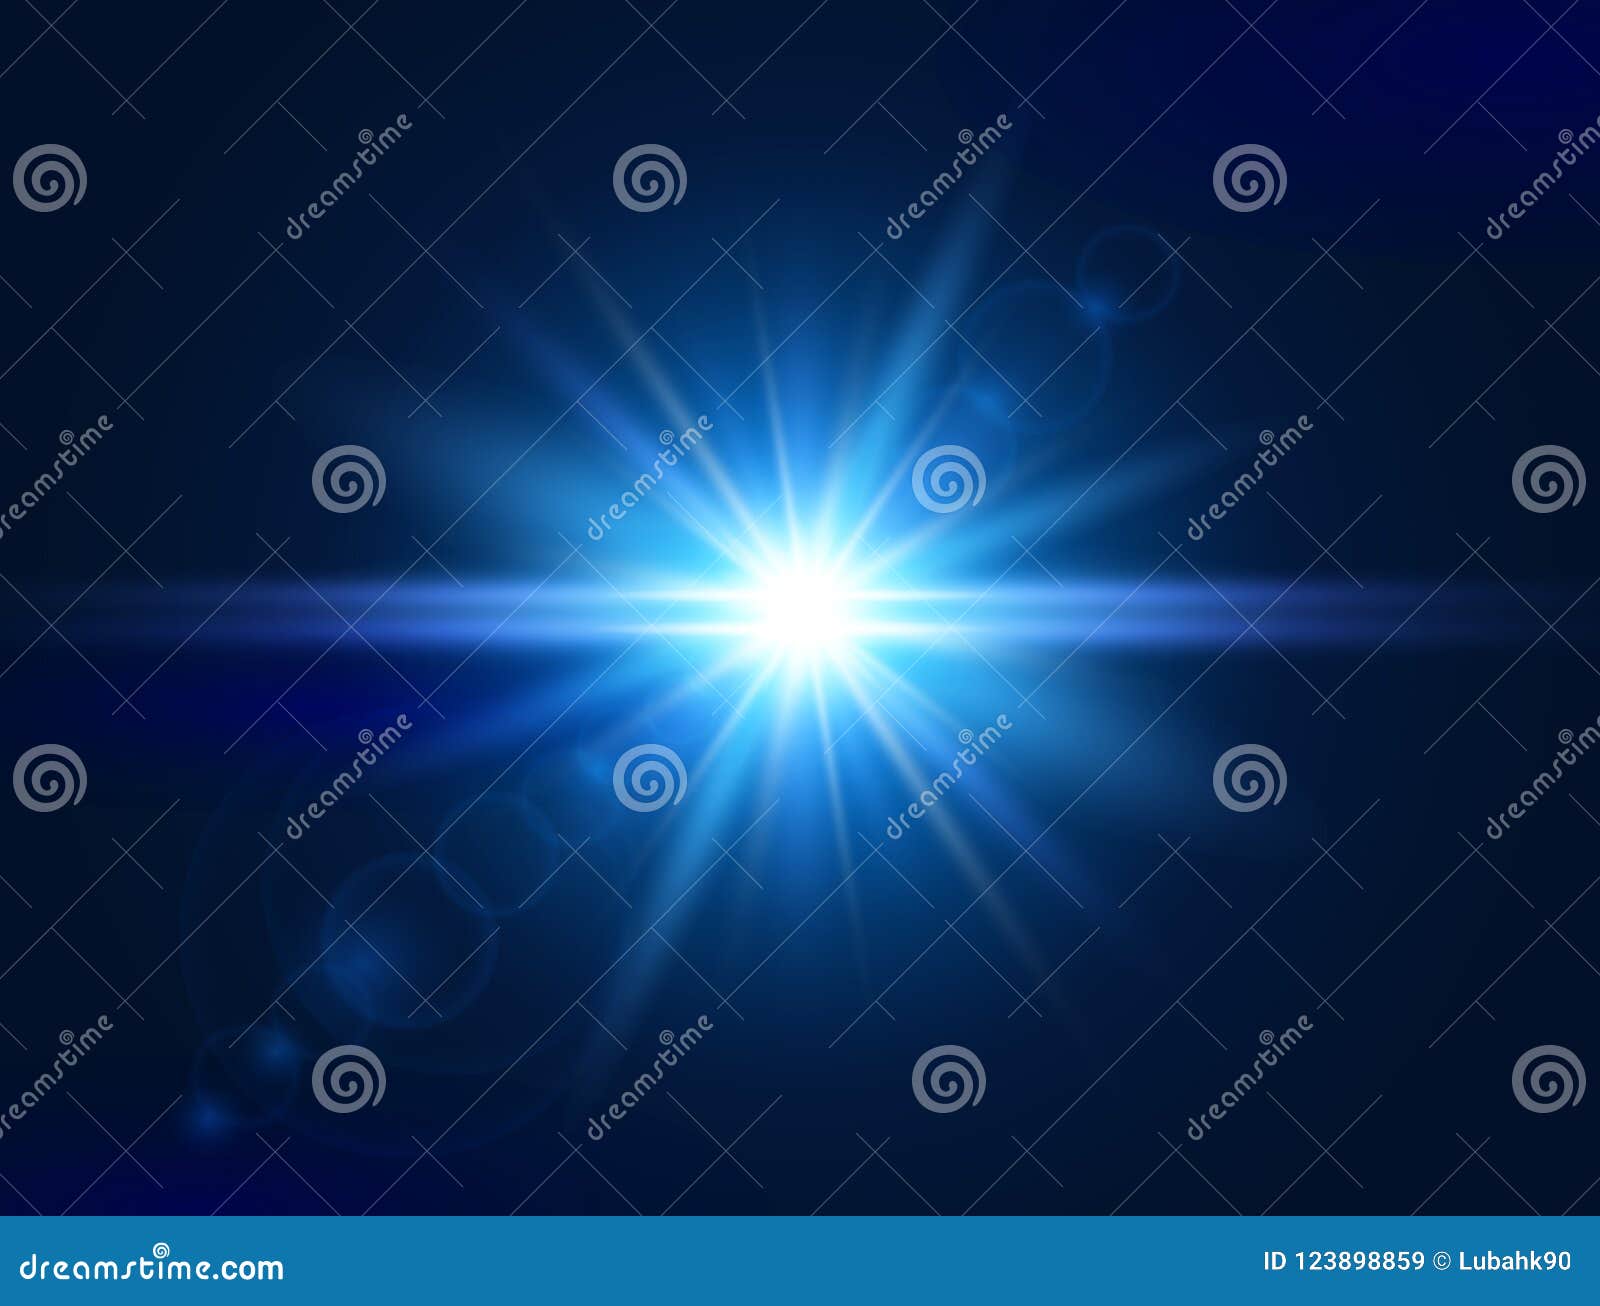 Glowing light effect blue lens flare glare Vector Image